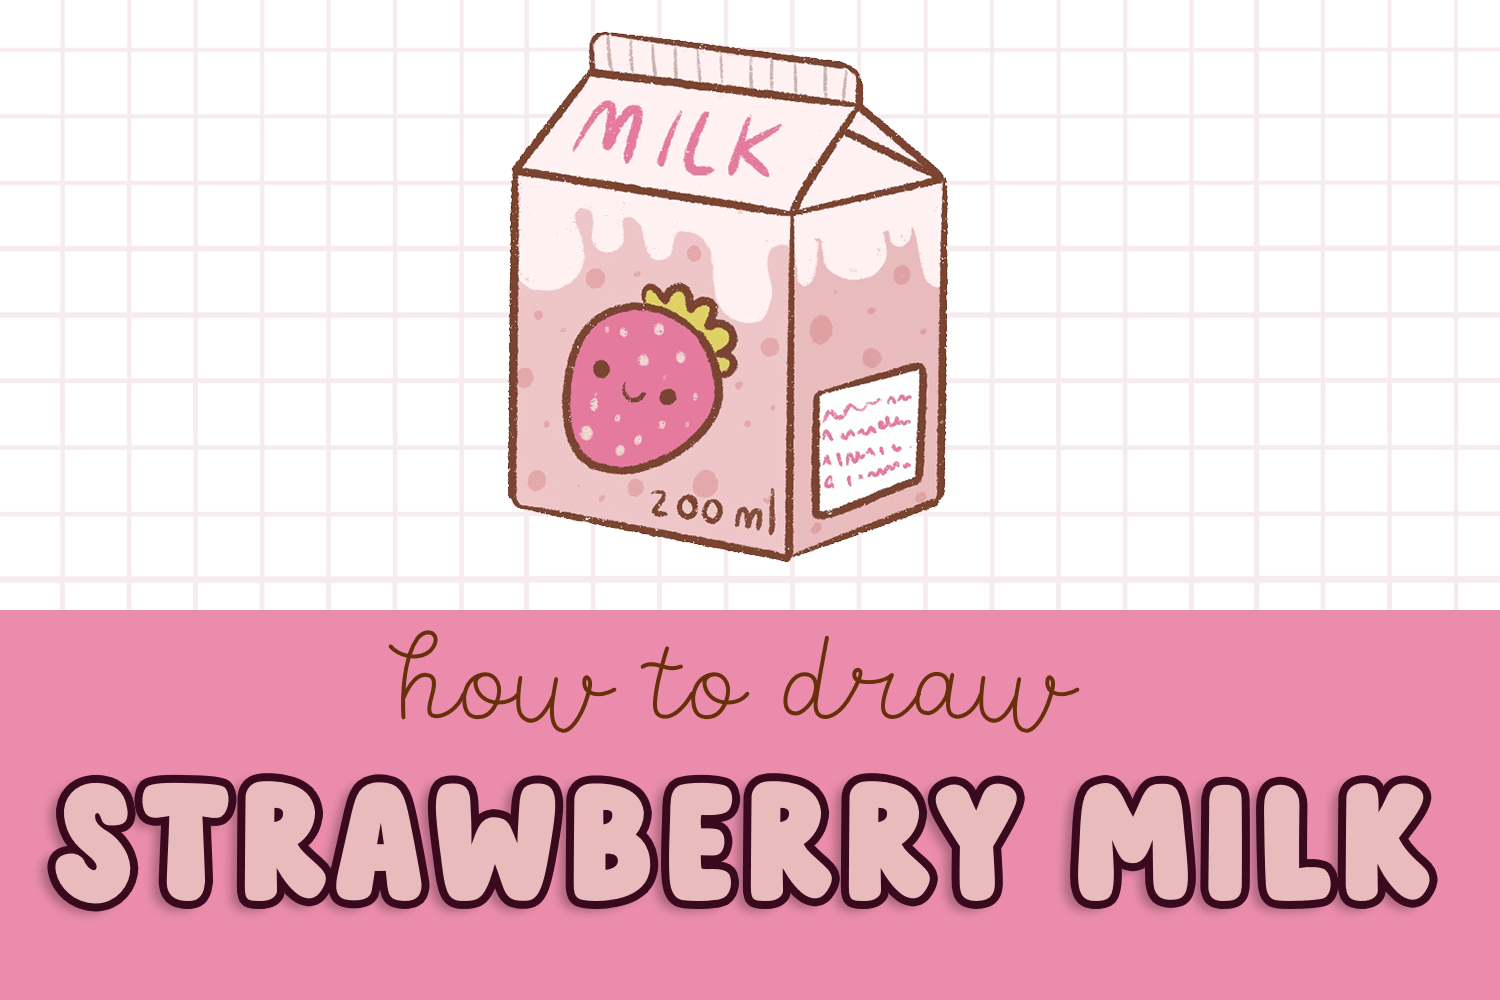 How to Draw a Strawberry Milk Carton Easy for Kids